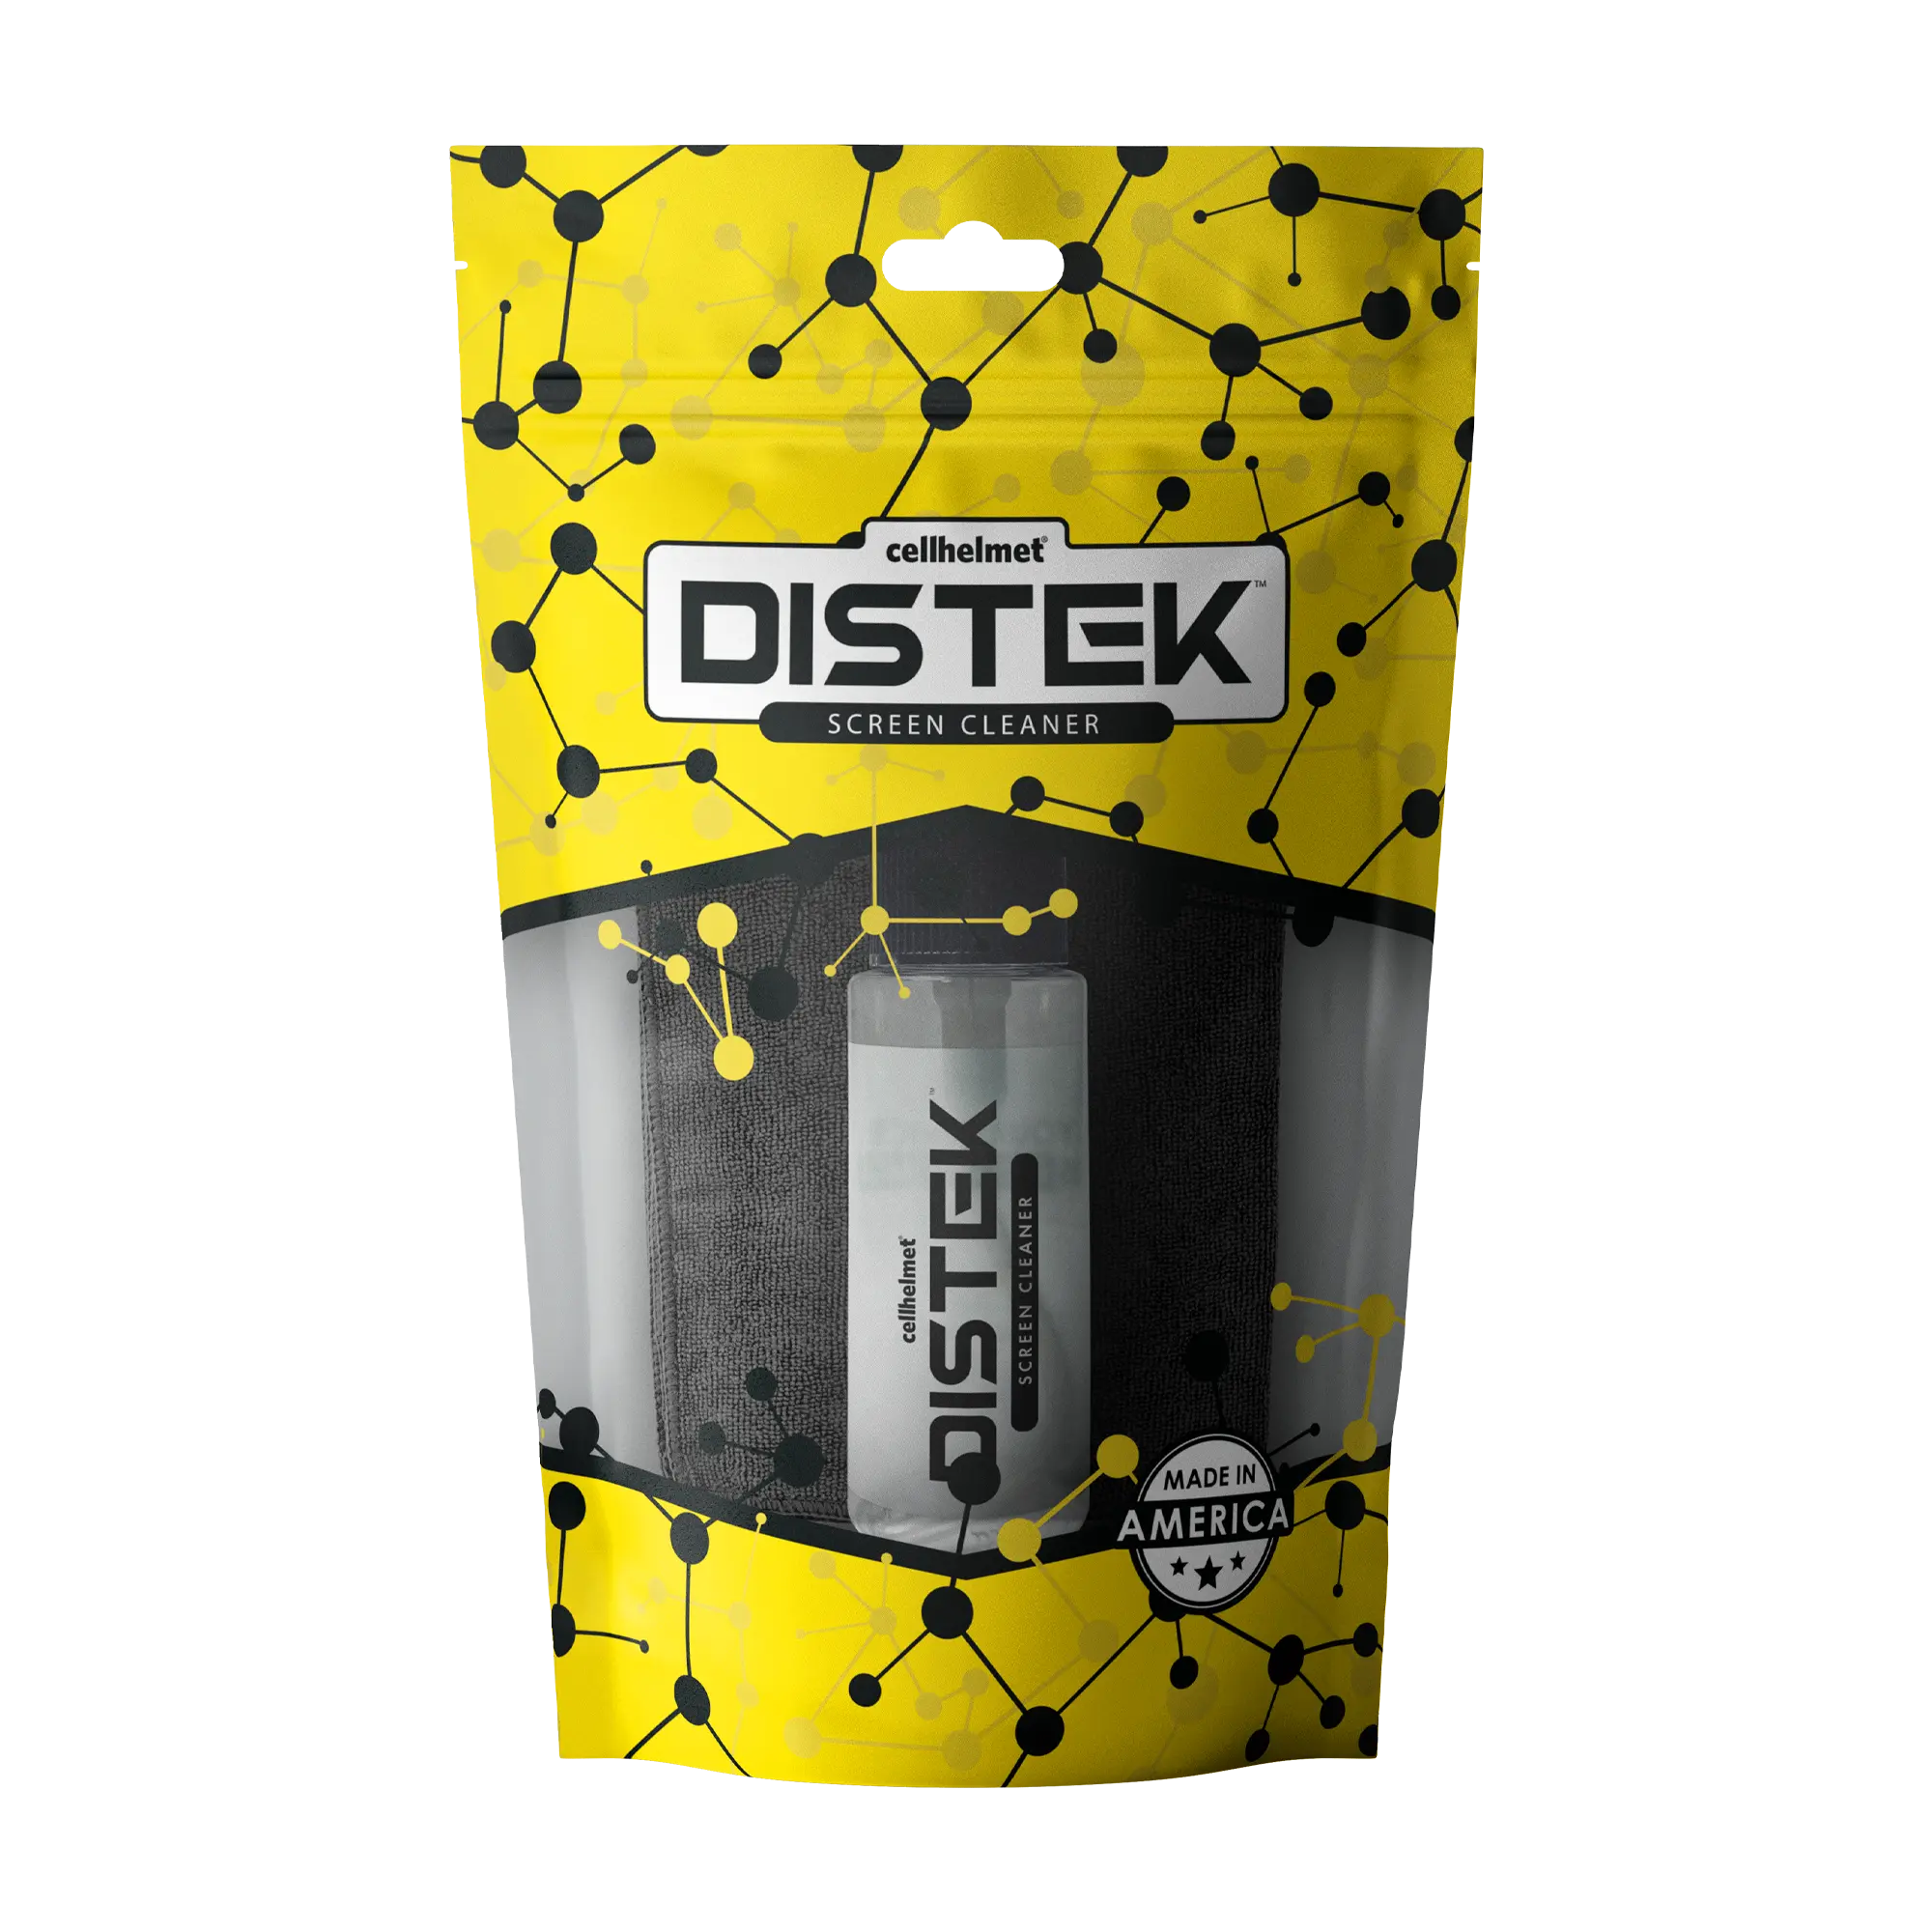 DISTEK Screen and Phone Cleaner with Cleaning Cloth - Screen Cleaner - 30mL - cellhelmet